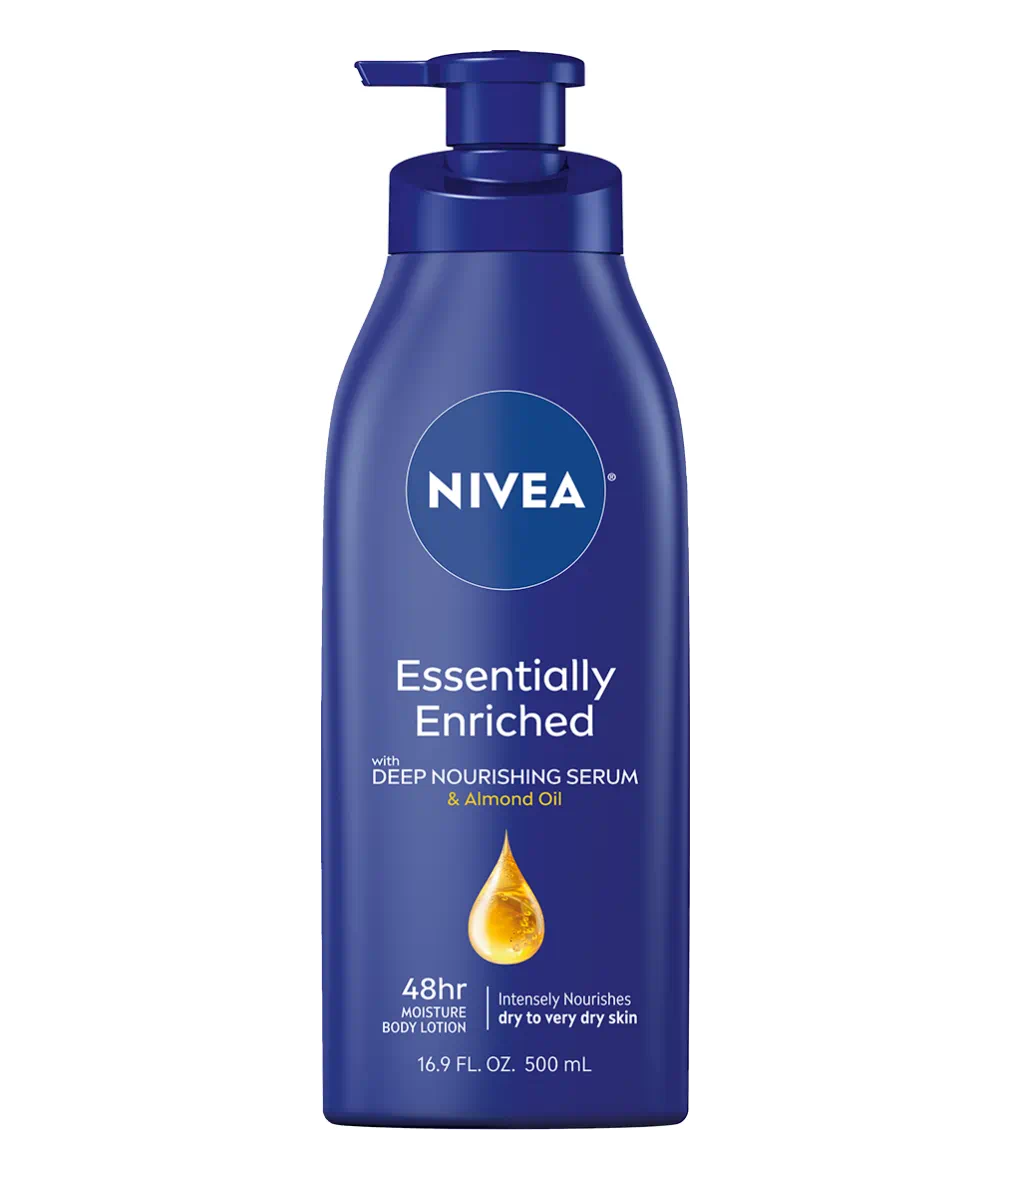 Essentially Enriched Body Lotion for dry to very dry skin